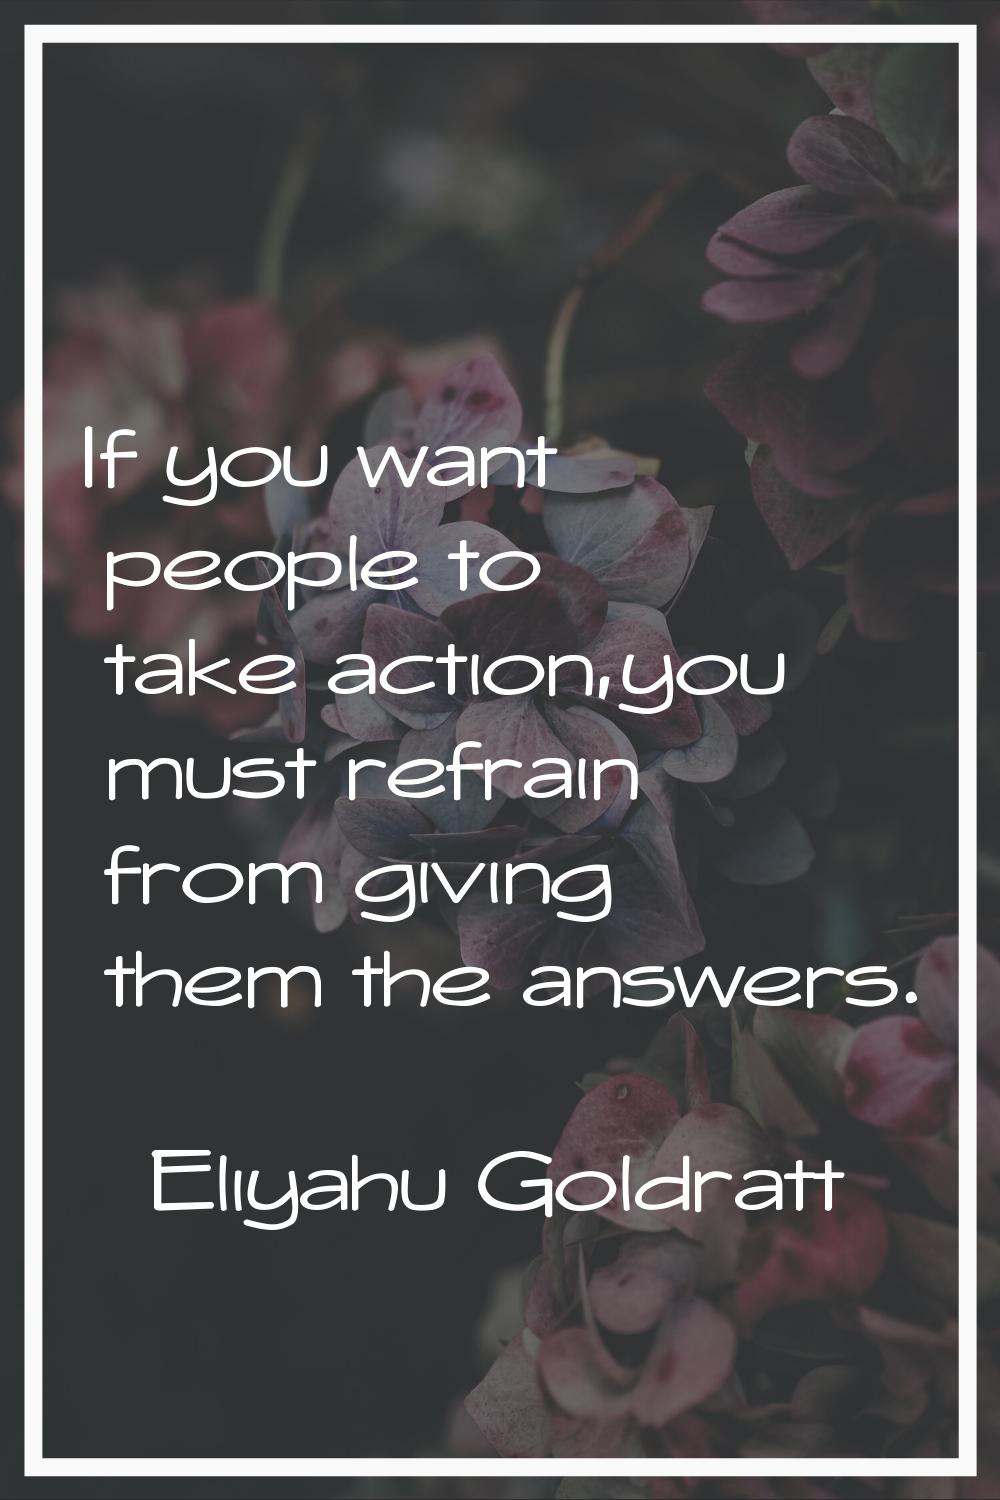 If you want people to take action,you must refrain from giving them the answers.